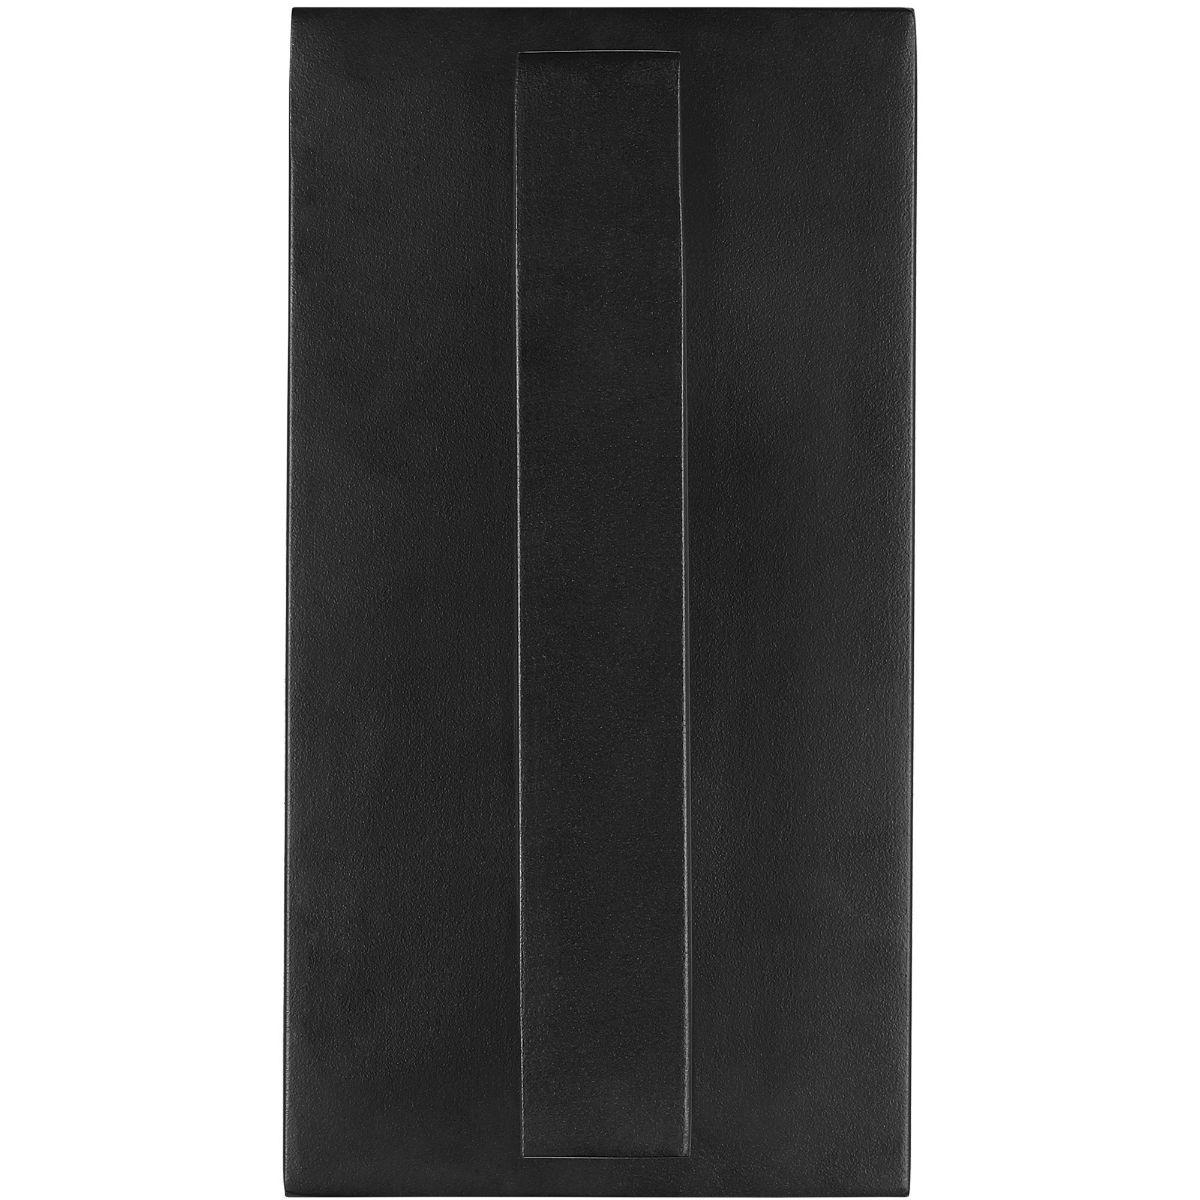 Anton 24 in. LED Wall Sconce Black finish